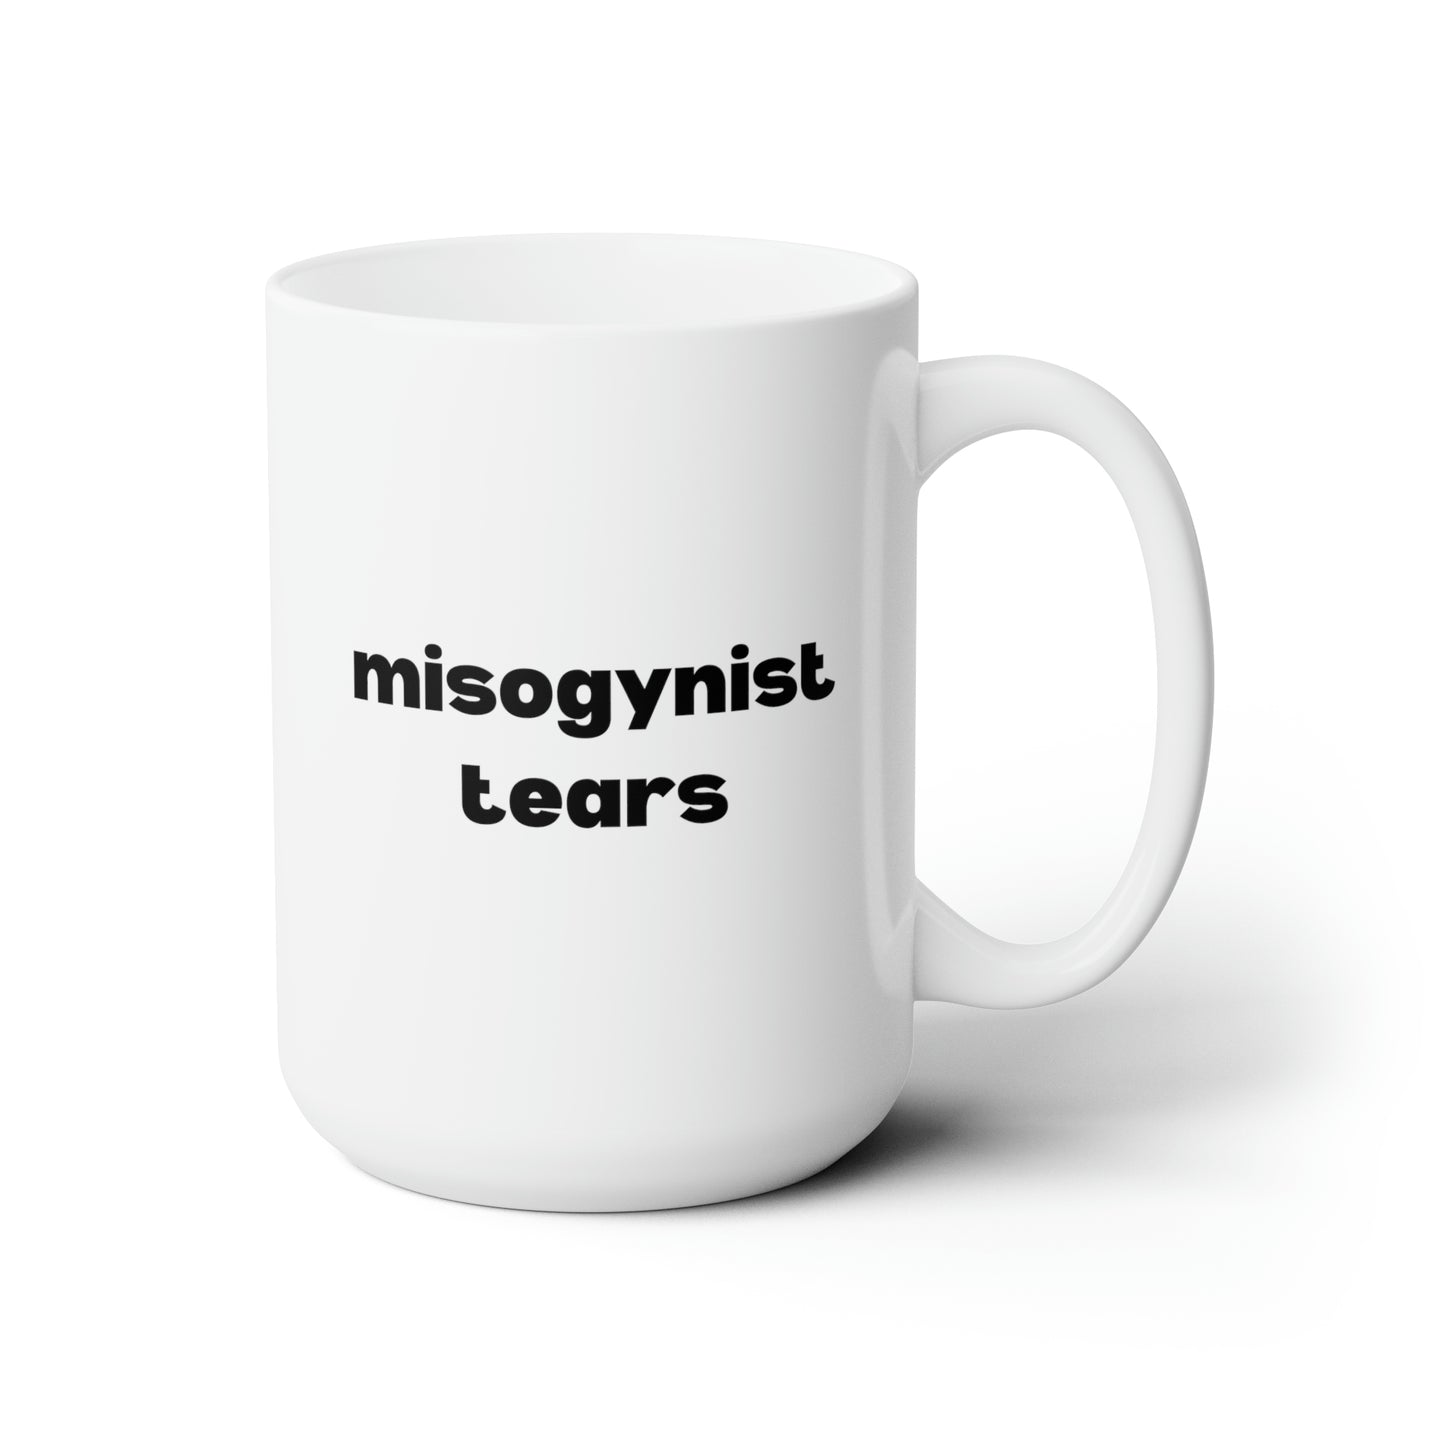 Misogynist Tears 15oz white funny large coffee mug gift for feminist quote feminism she persisted smash the patriarchy waveywares wavey wares wavywares wavy wares